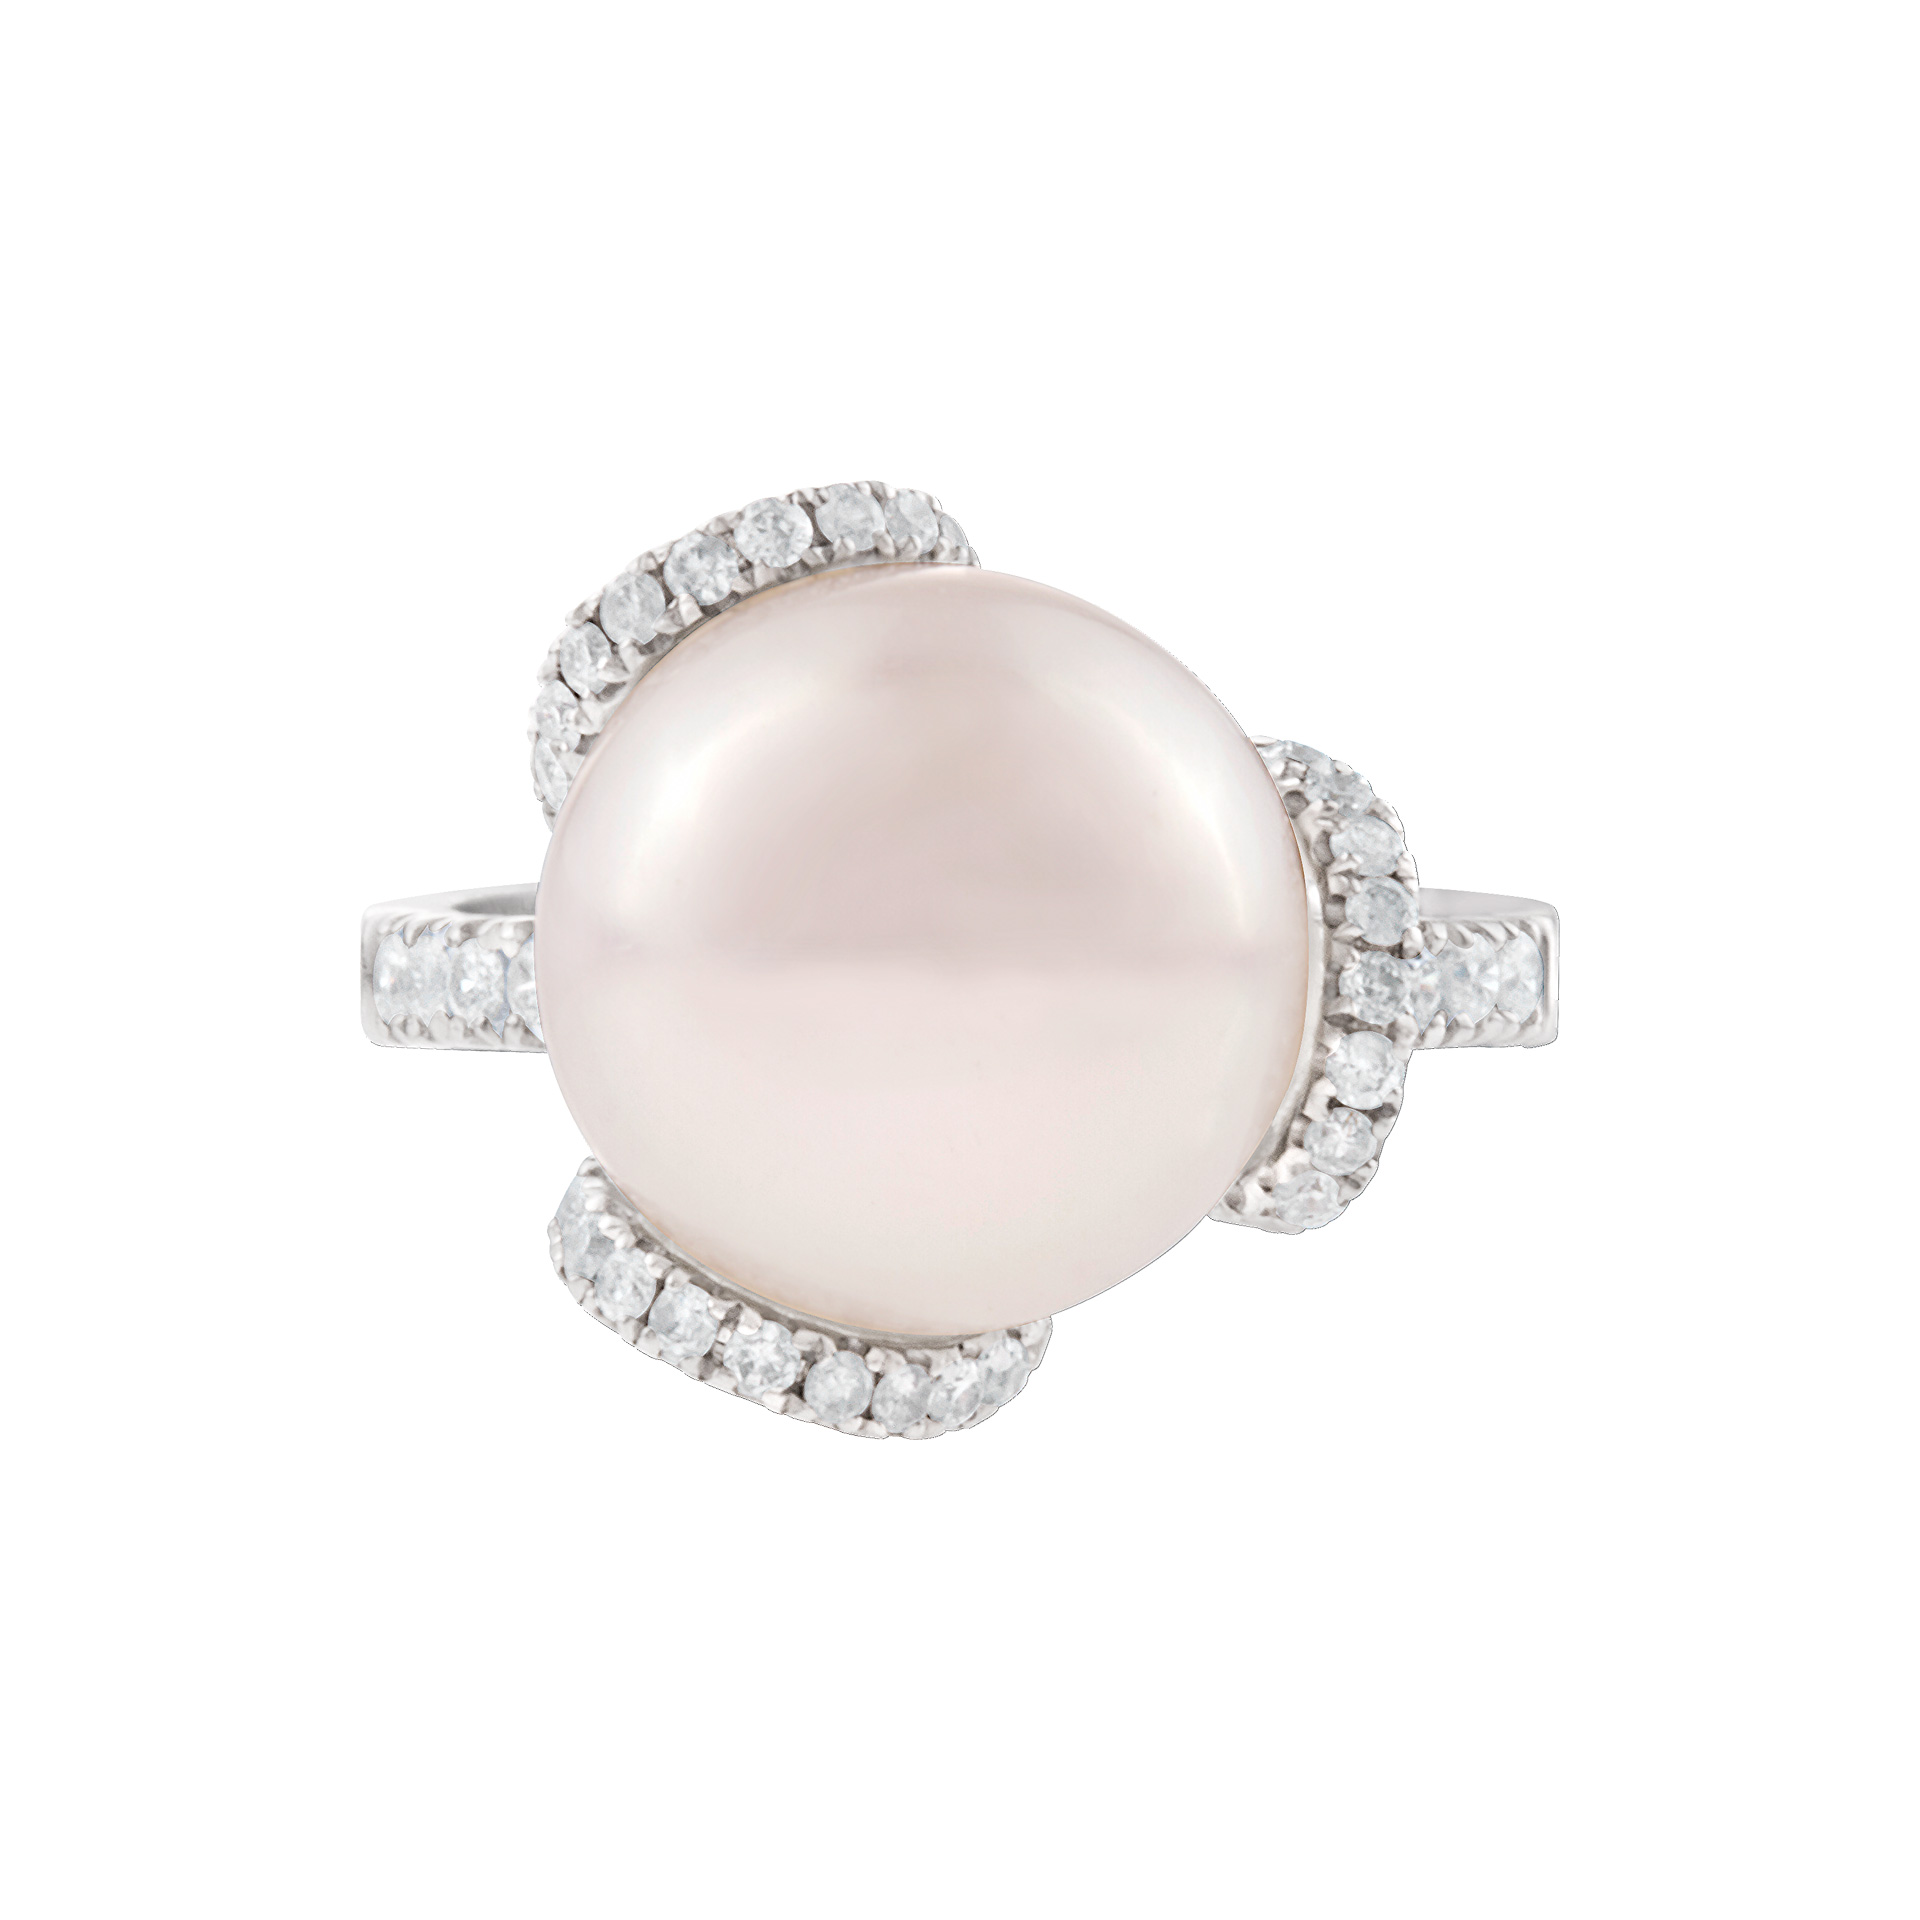 Pearl and diamond ring set in 18k white gold. 0.63 carats in diamonds. Size 6.75 image 1